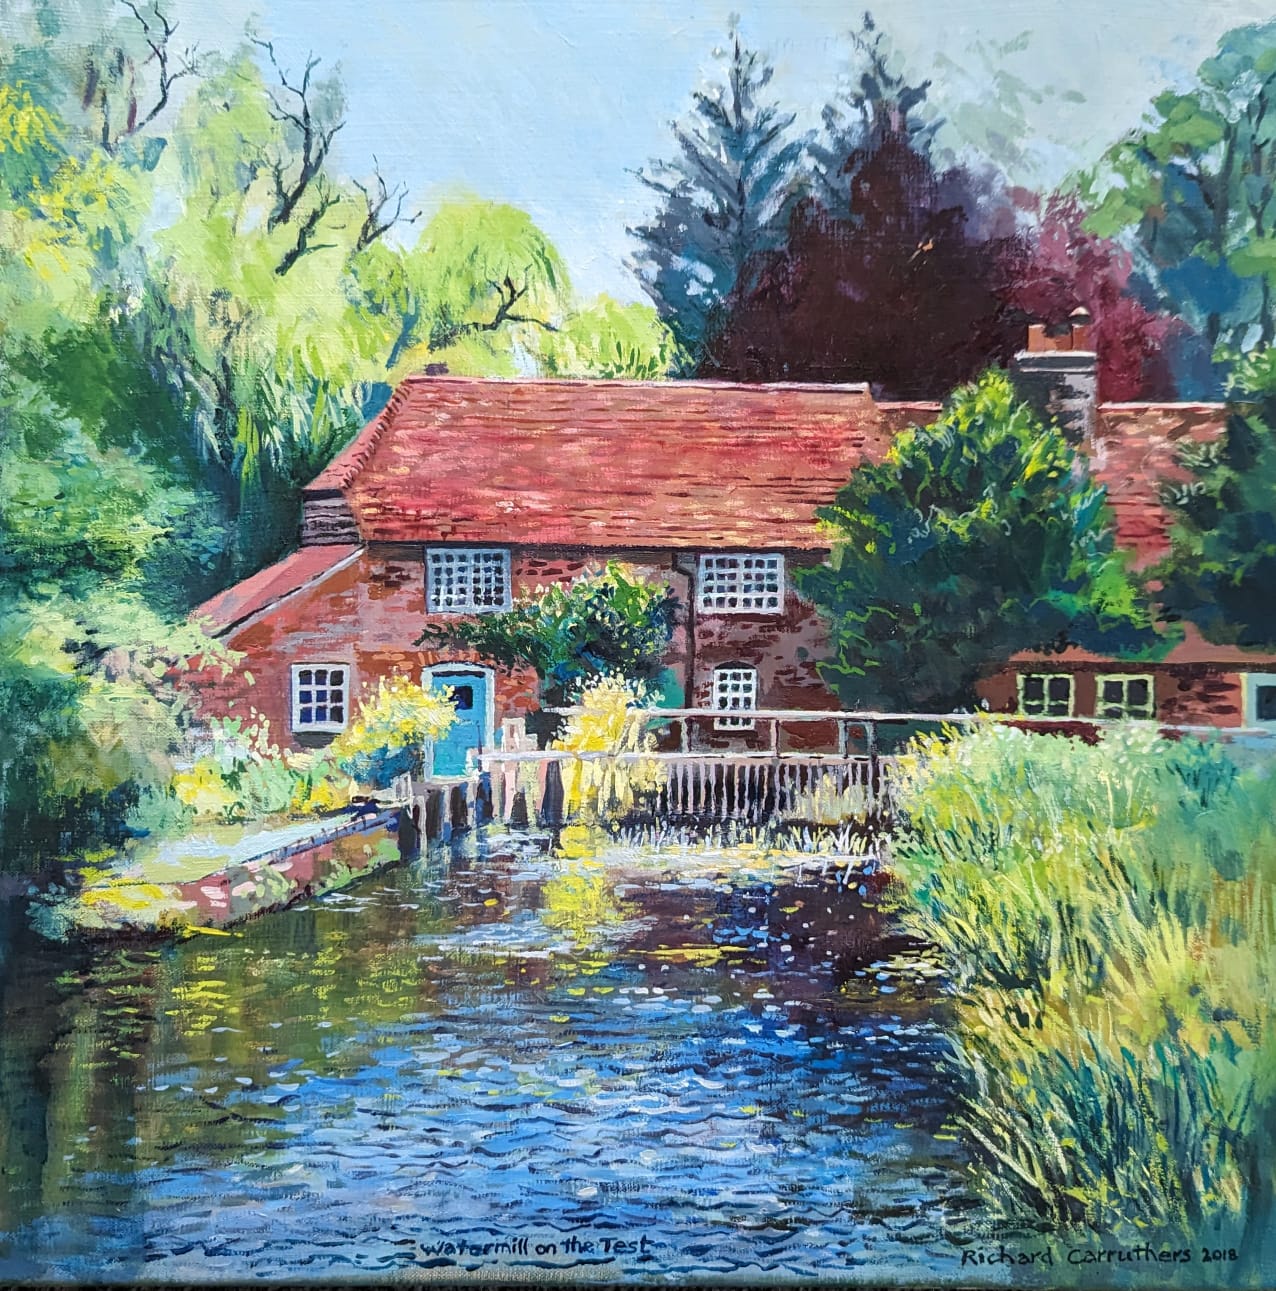 "Watermill on The Test" by Richard Carruthers 50cm x 50 cm